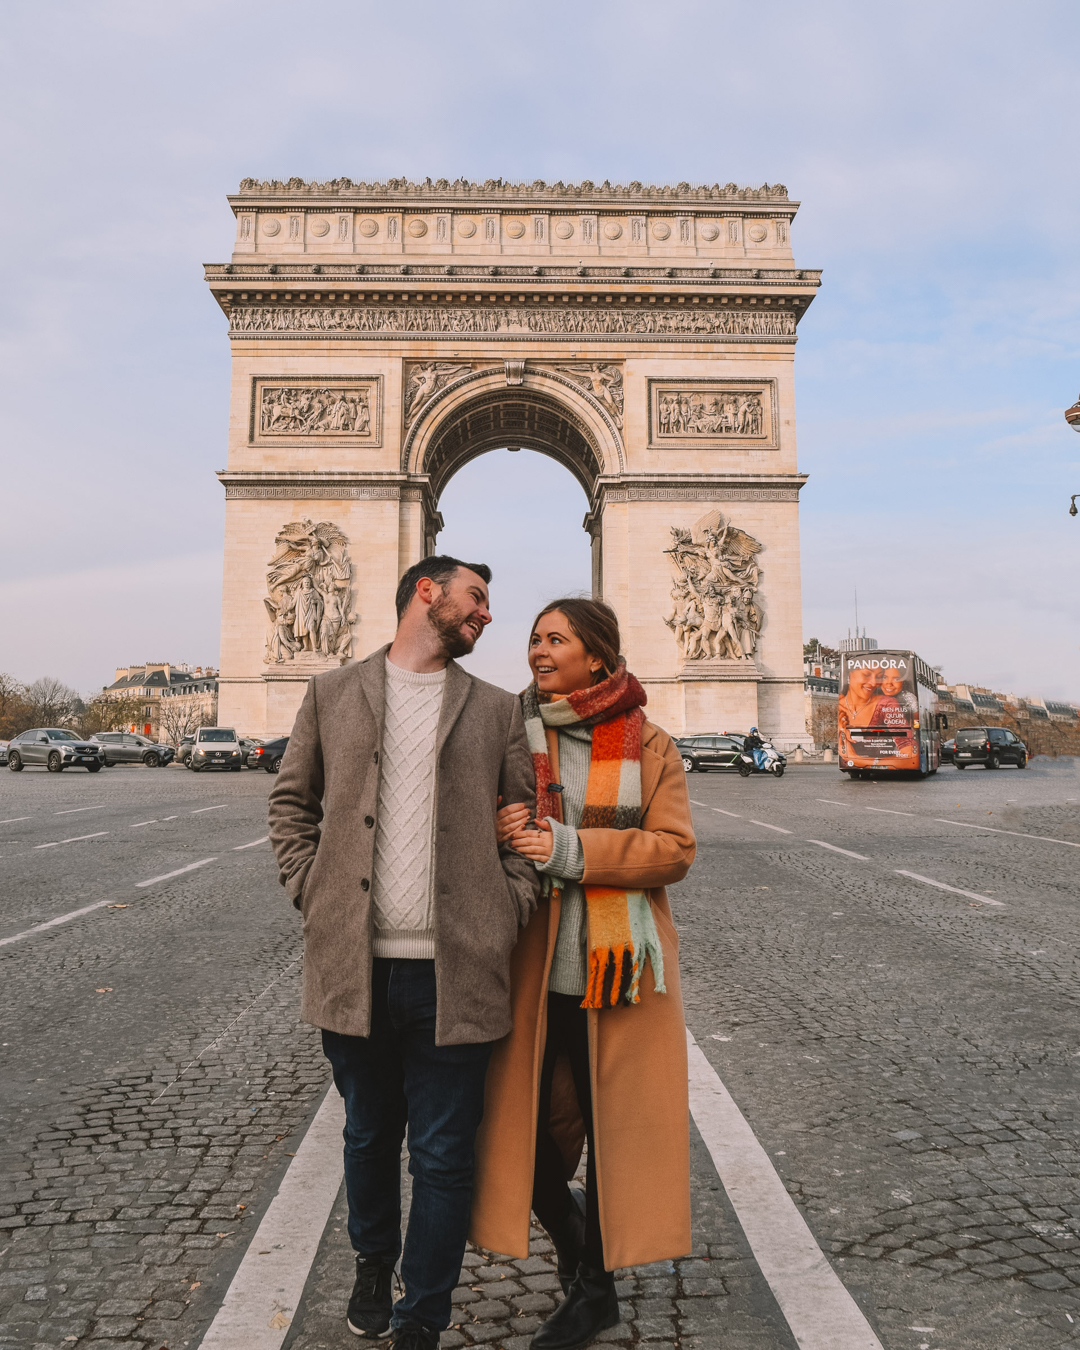 Chris and Reanna walking in front of the Arc de Triomphe